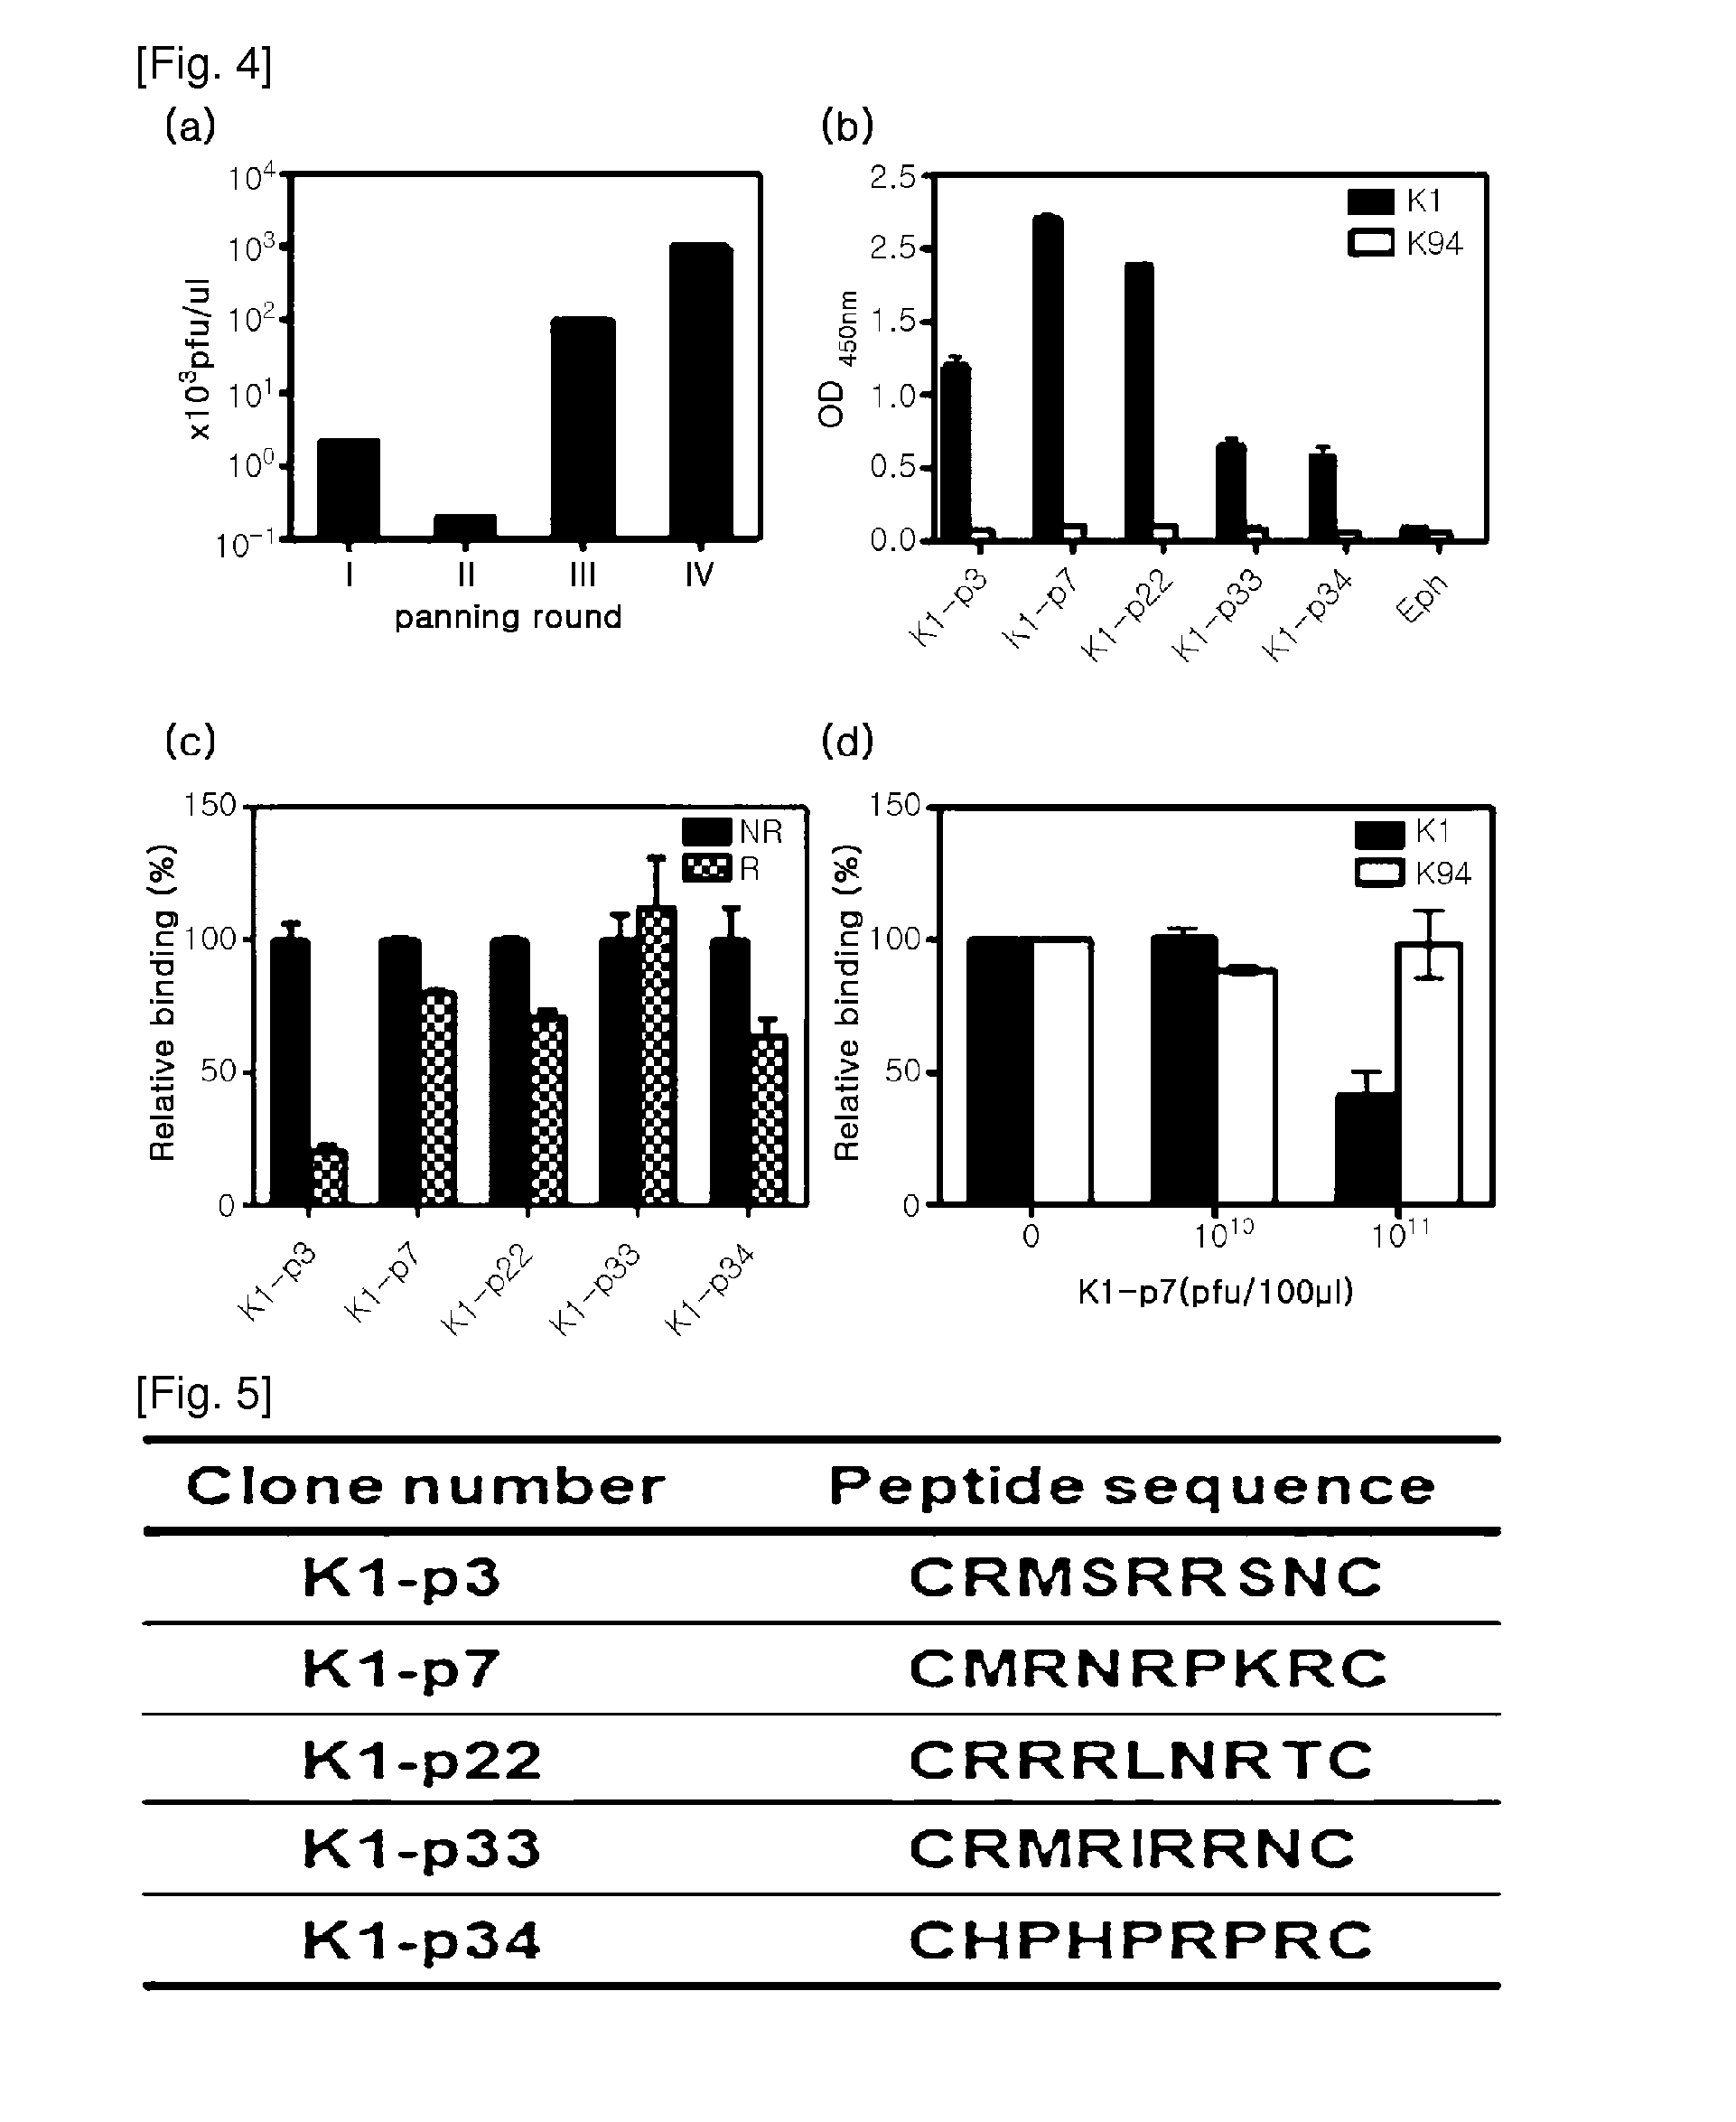 Diagnostic Marker for Hepatocellular Carcinoma Comprising Anti-FASN Autoantibodies and a Diagnostic Composition for Hepatocellular Carcinoma Comprising Antigens Thereof